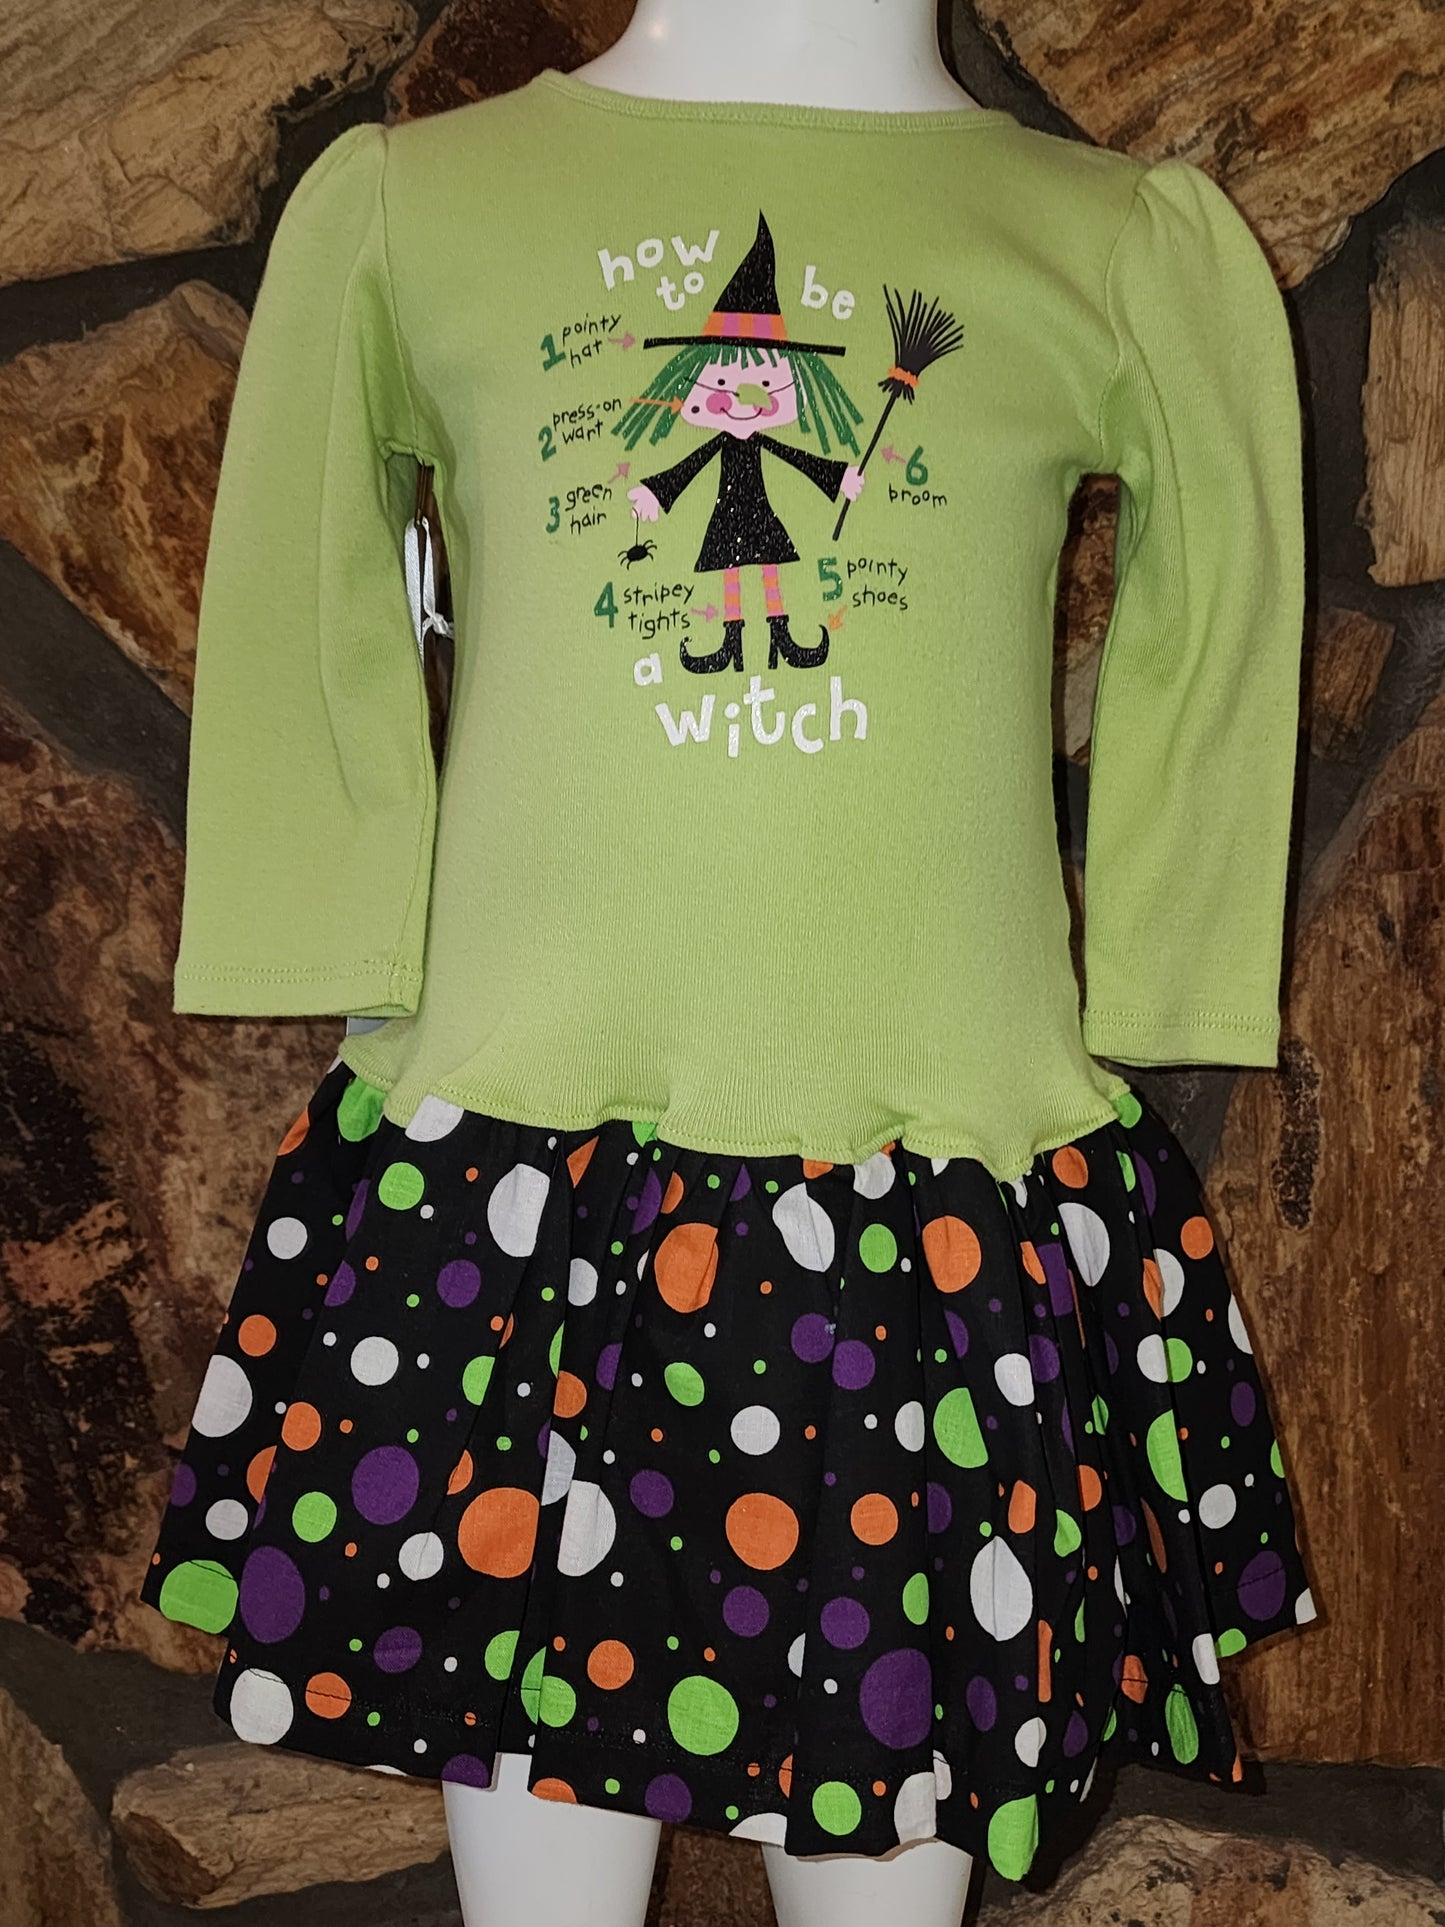 How to be a Witch size 12m Dress